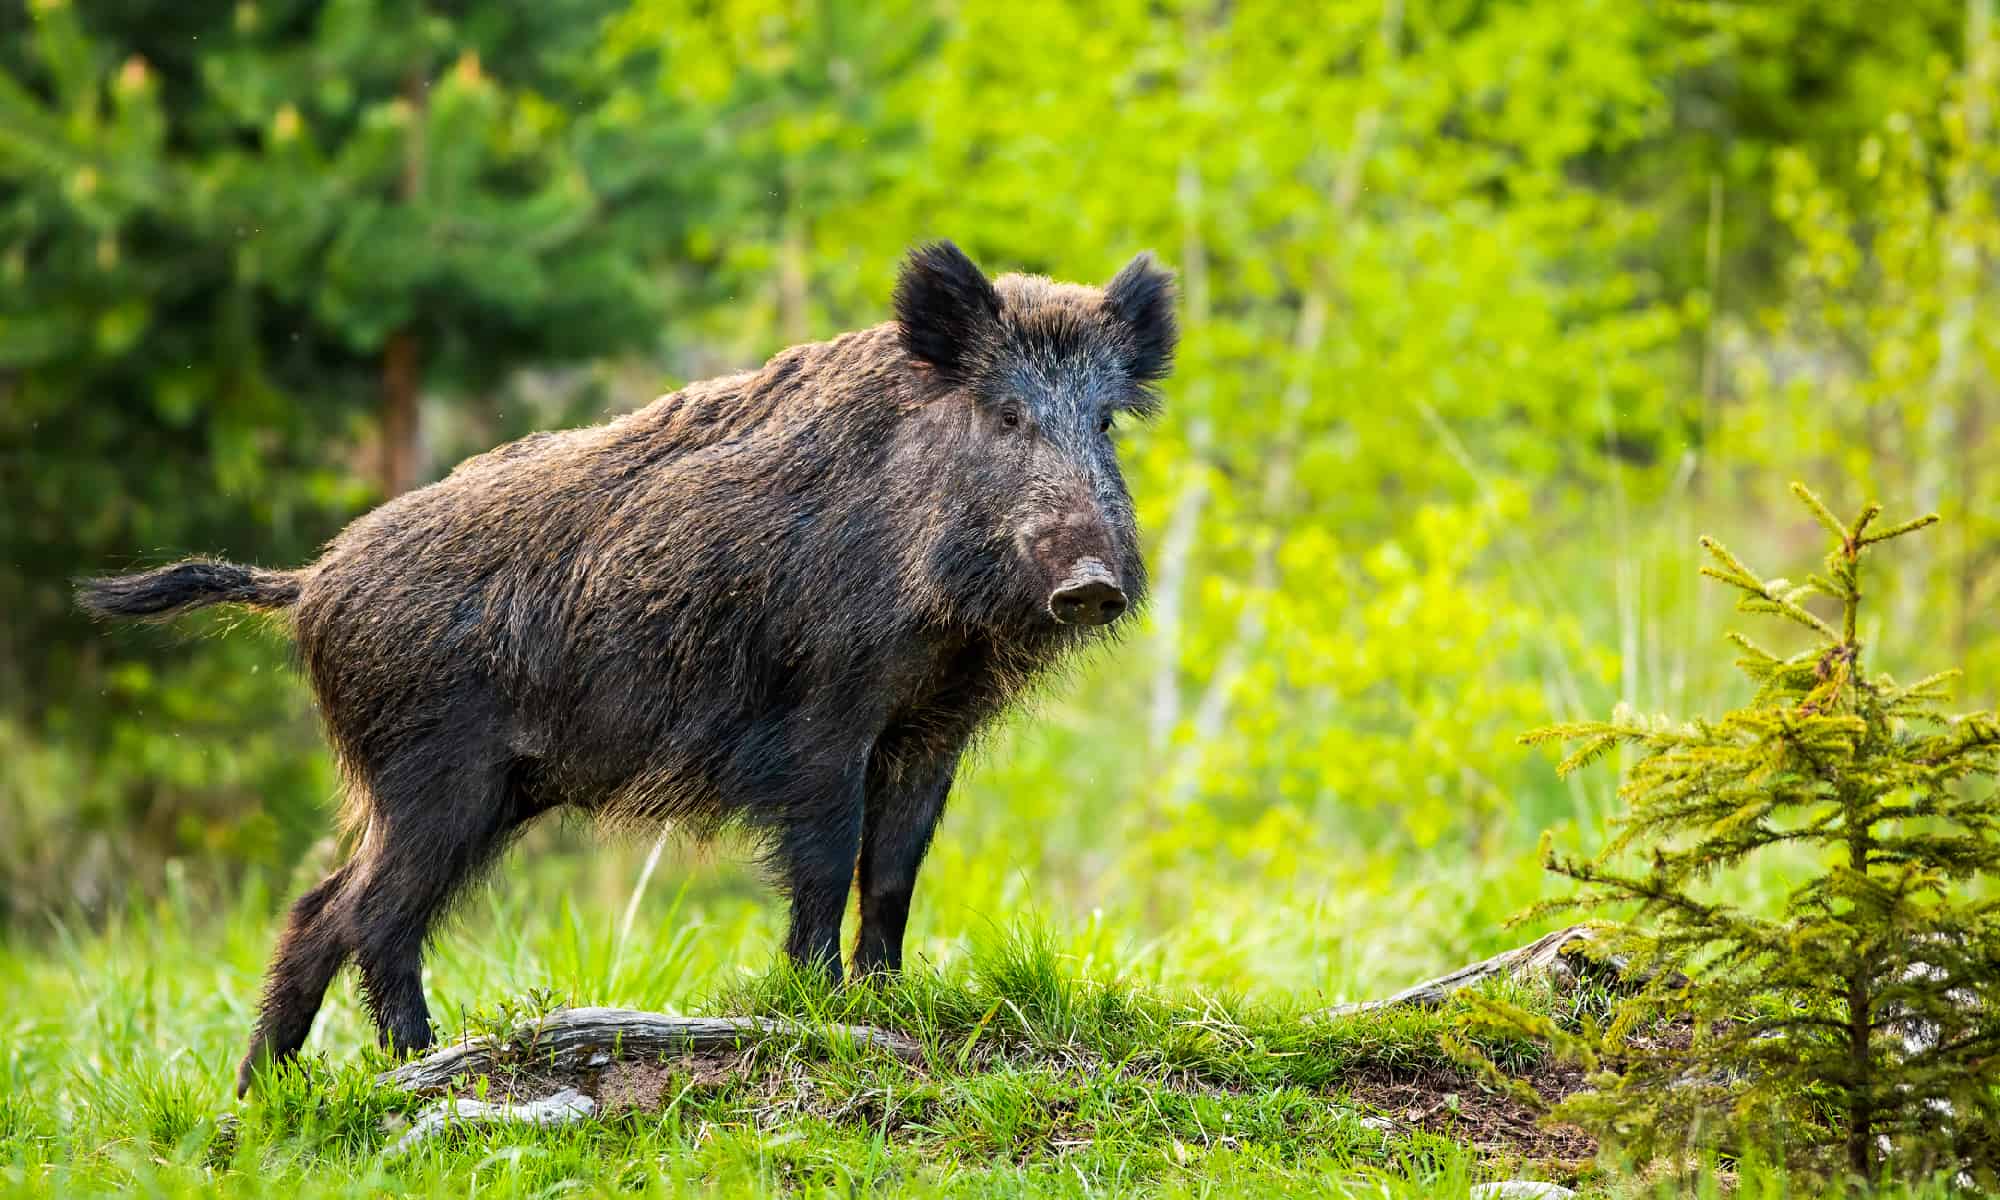 Wild Hogs in Florida: How Many Are There and Where Do They Live?